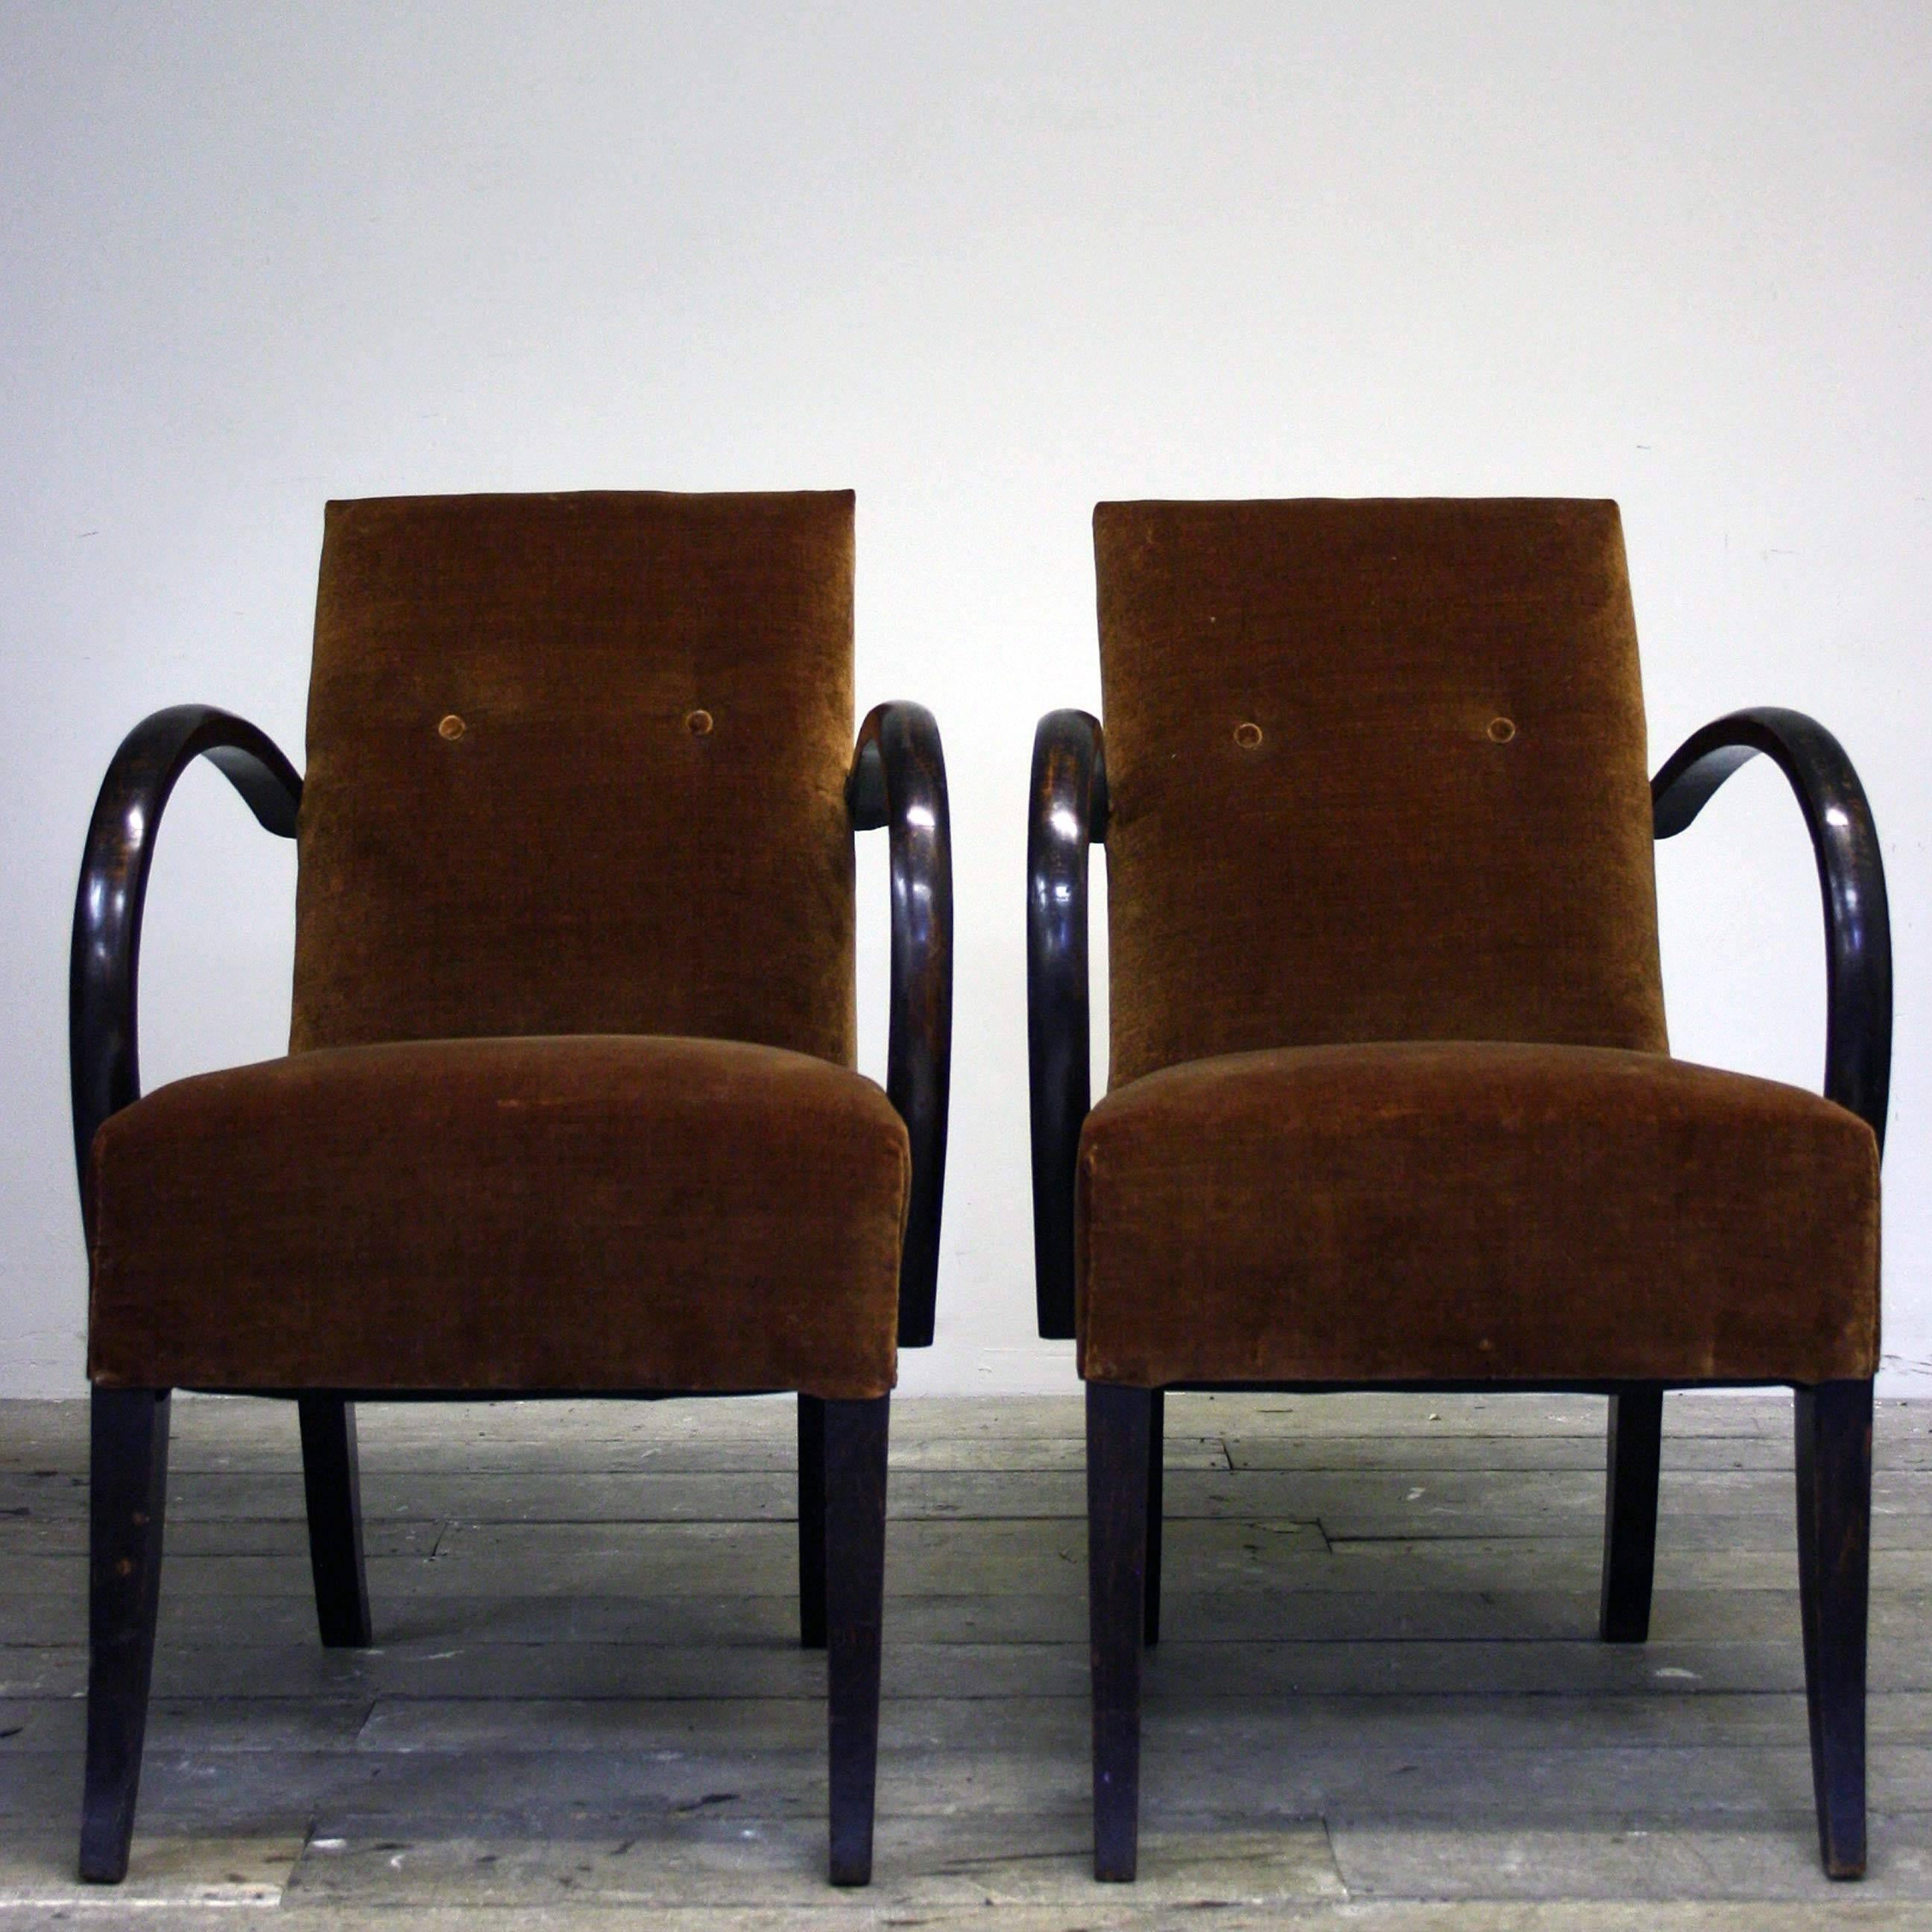 Very smart pair of buttoned back open armchairs from the mid-20th century reupholstered in high quality brown velvet. These chairs are very comfy and extremely stylish with over exaggerated curved arms and back.

Additional dimensions: Armrest